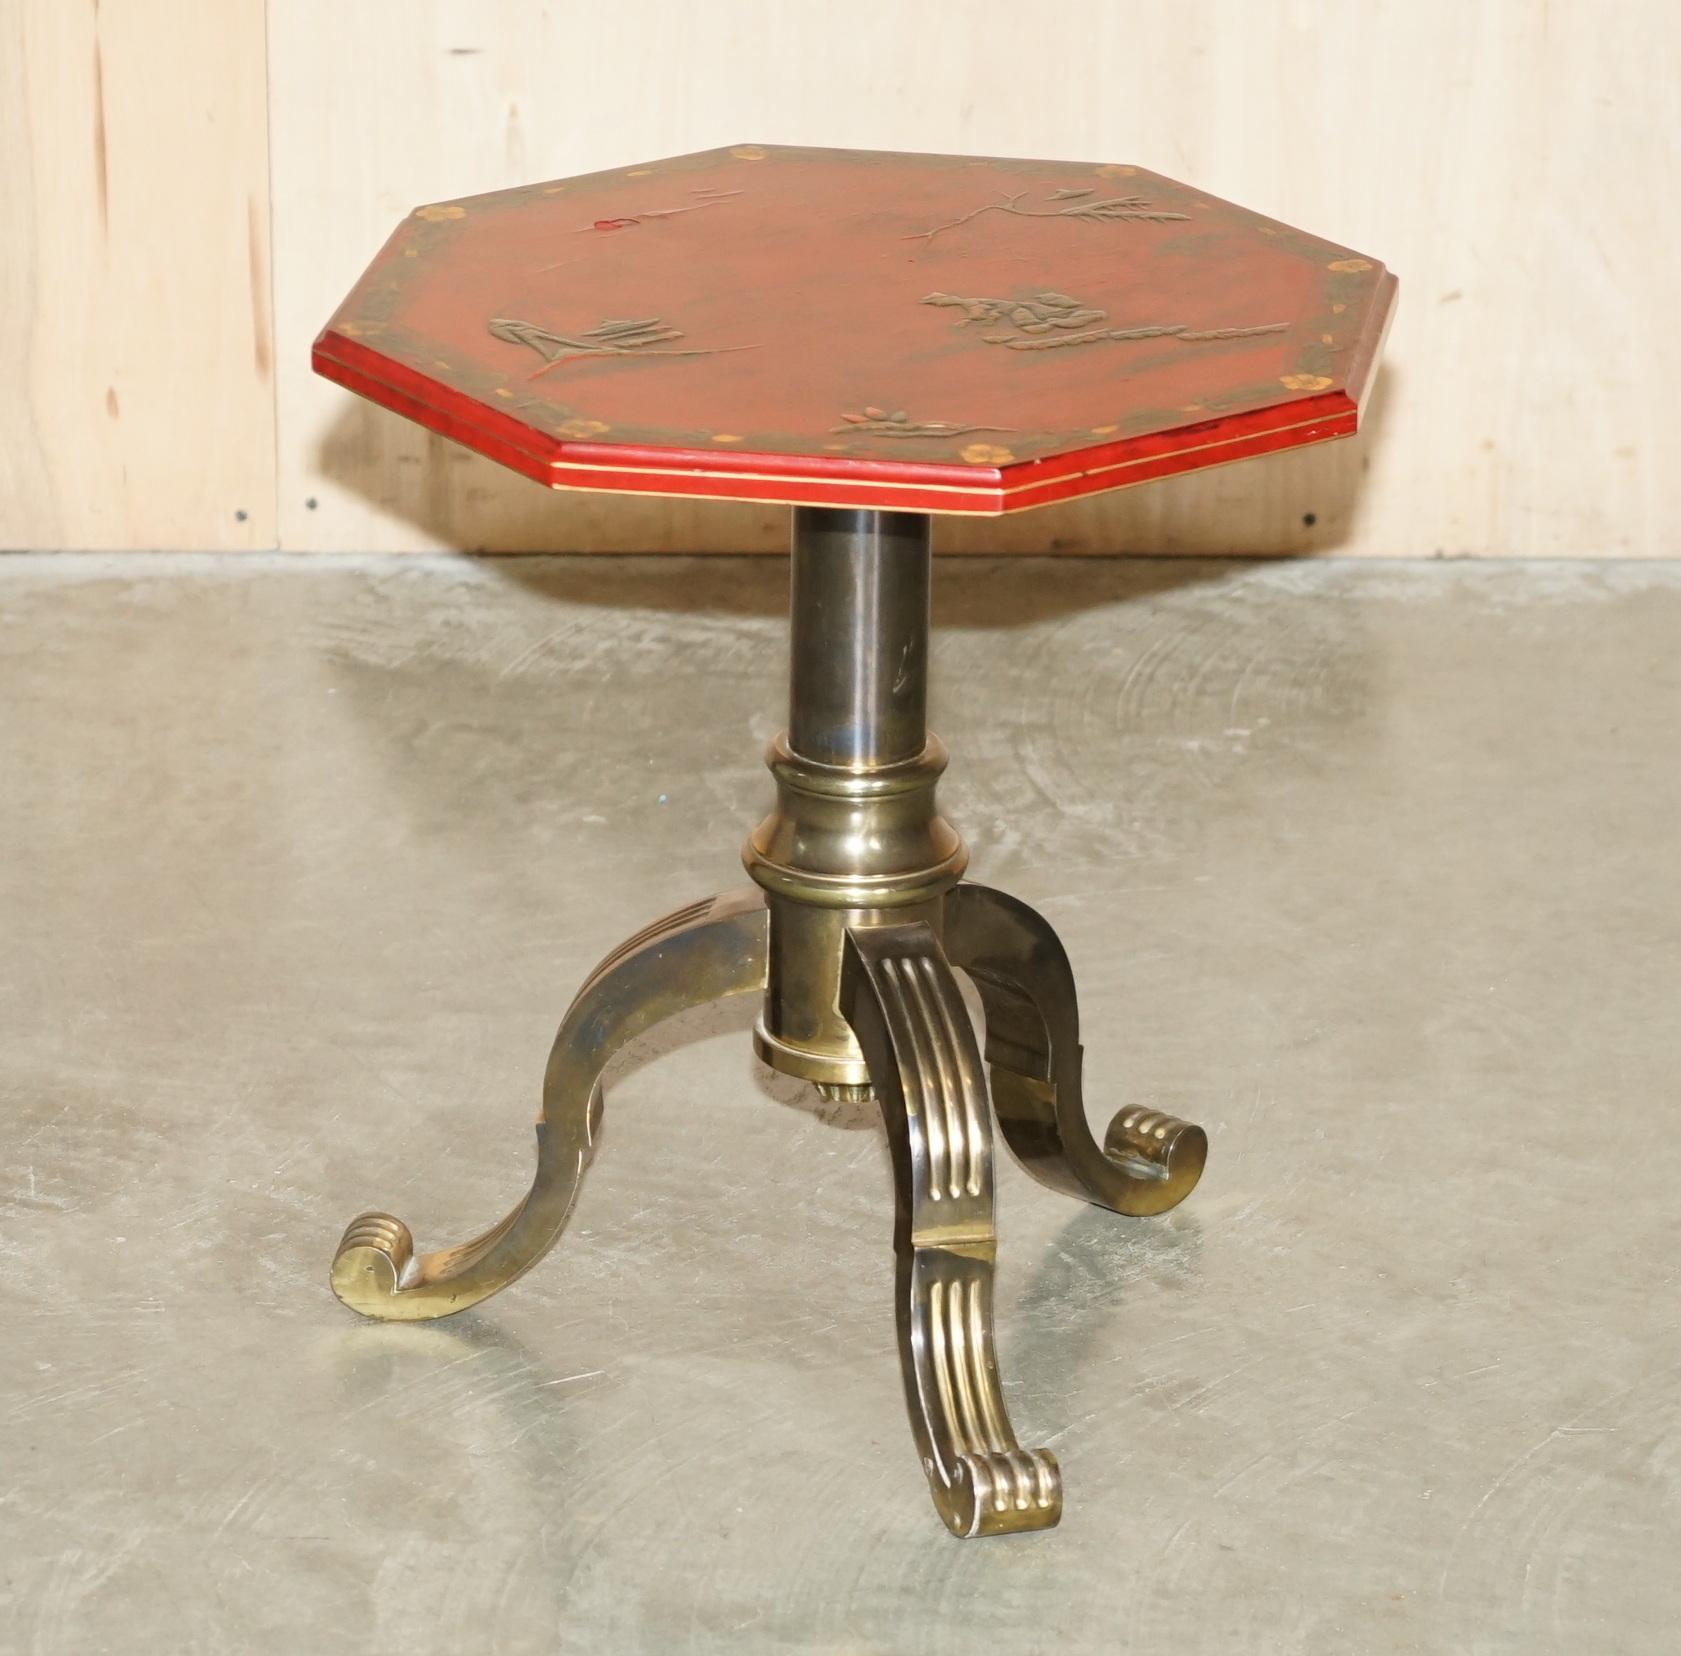 Royal House Antiques

Royal House Antiques is delighted to offer for sale this lovely circa 1920's hand made Chinese Chinoiserie side end lamp table with rare solid metal brass finish base

Please note the delivery fee listed is just a guide, it